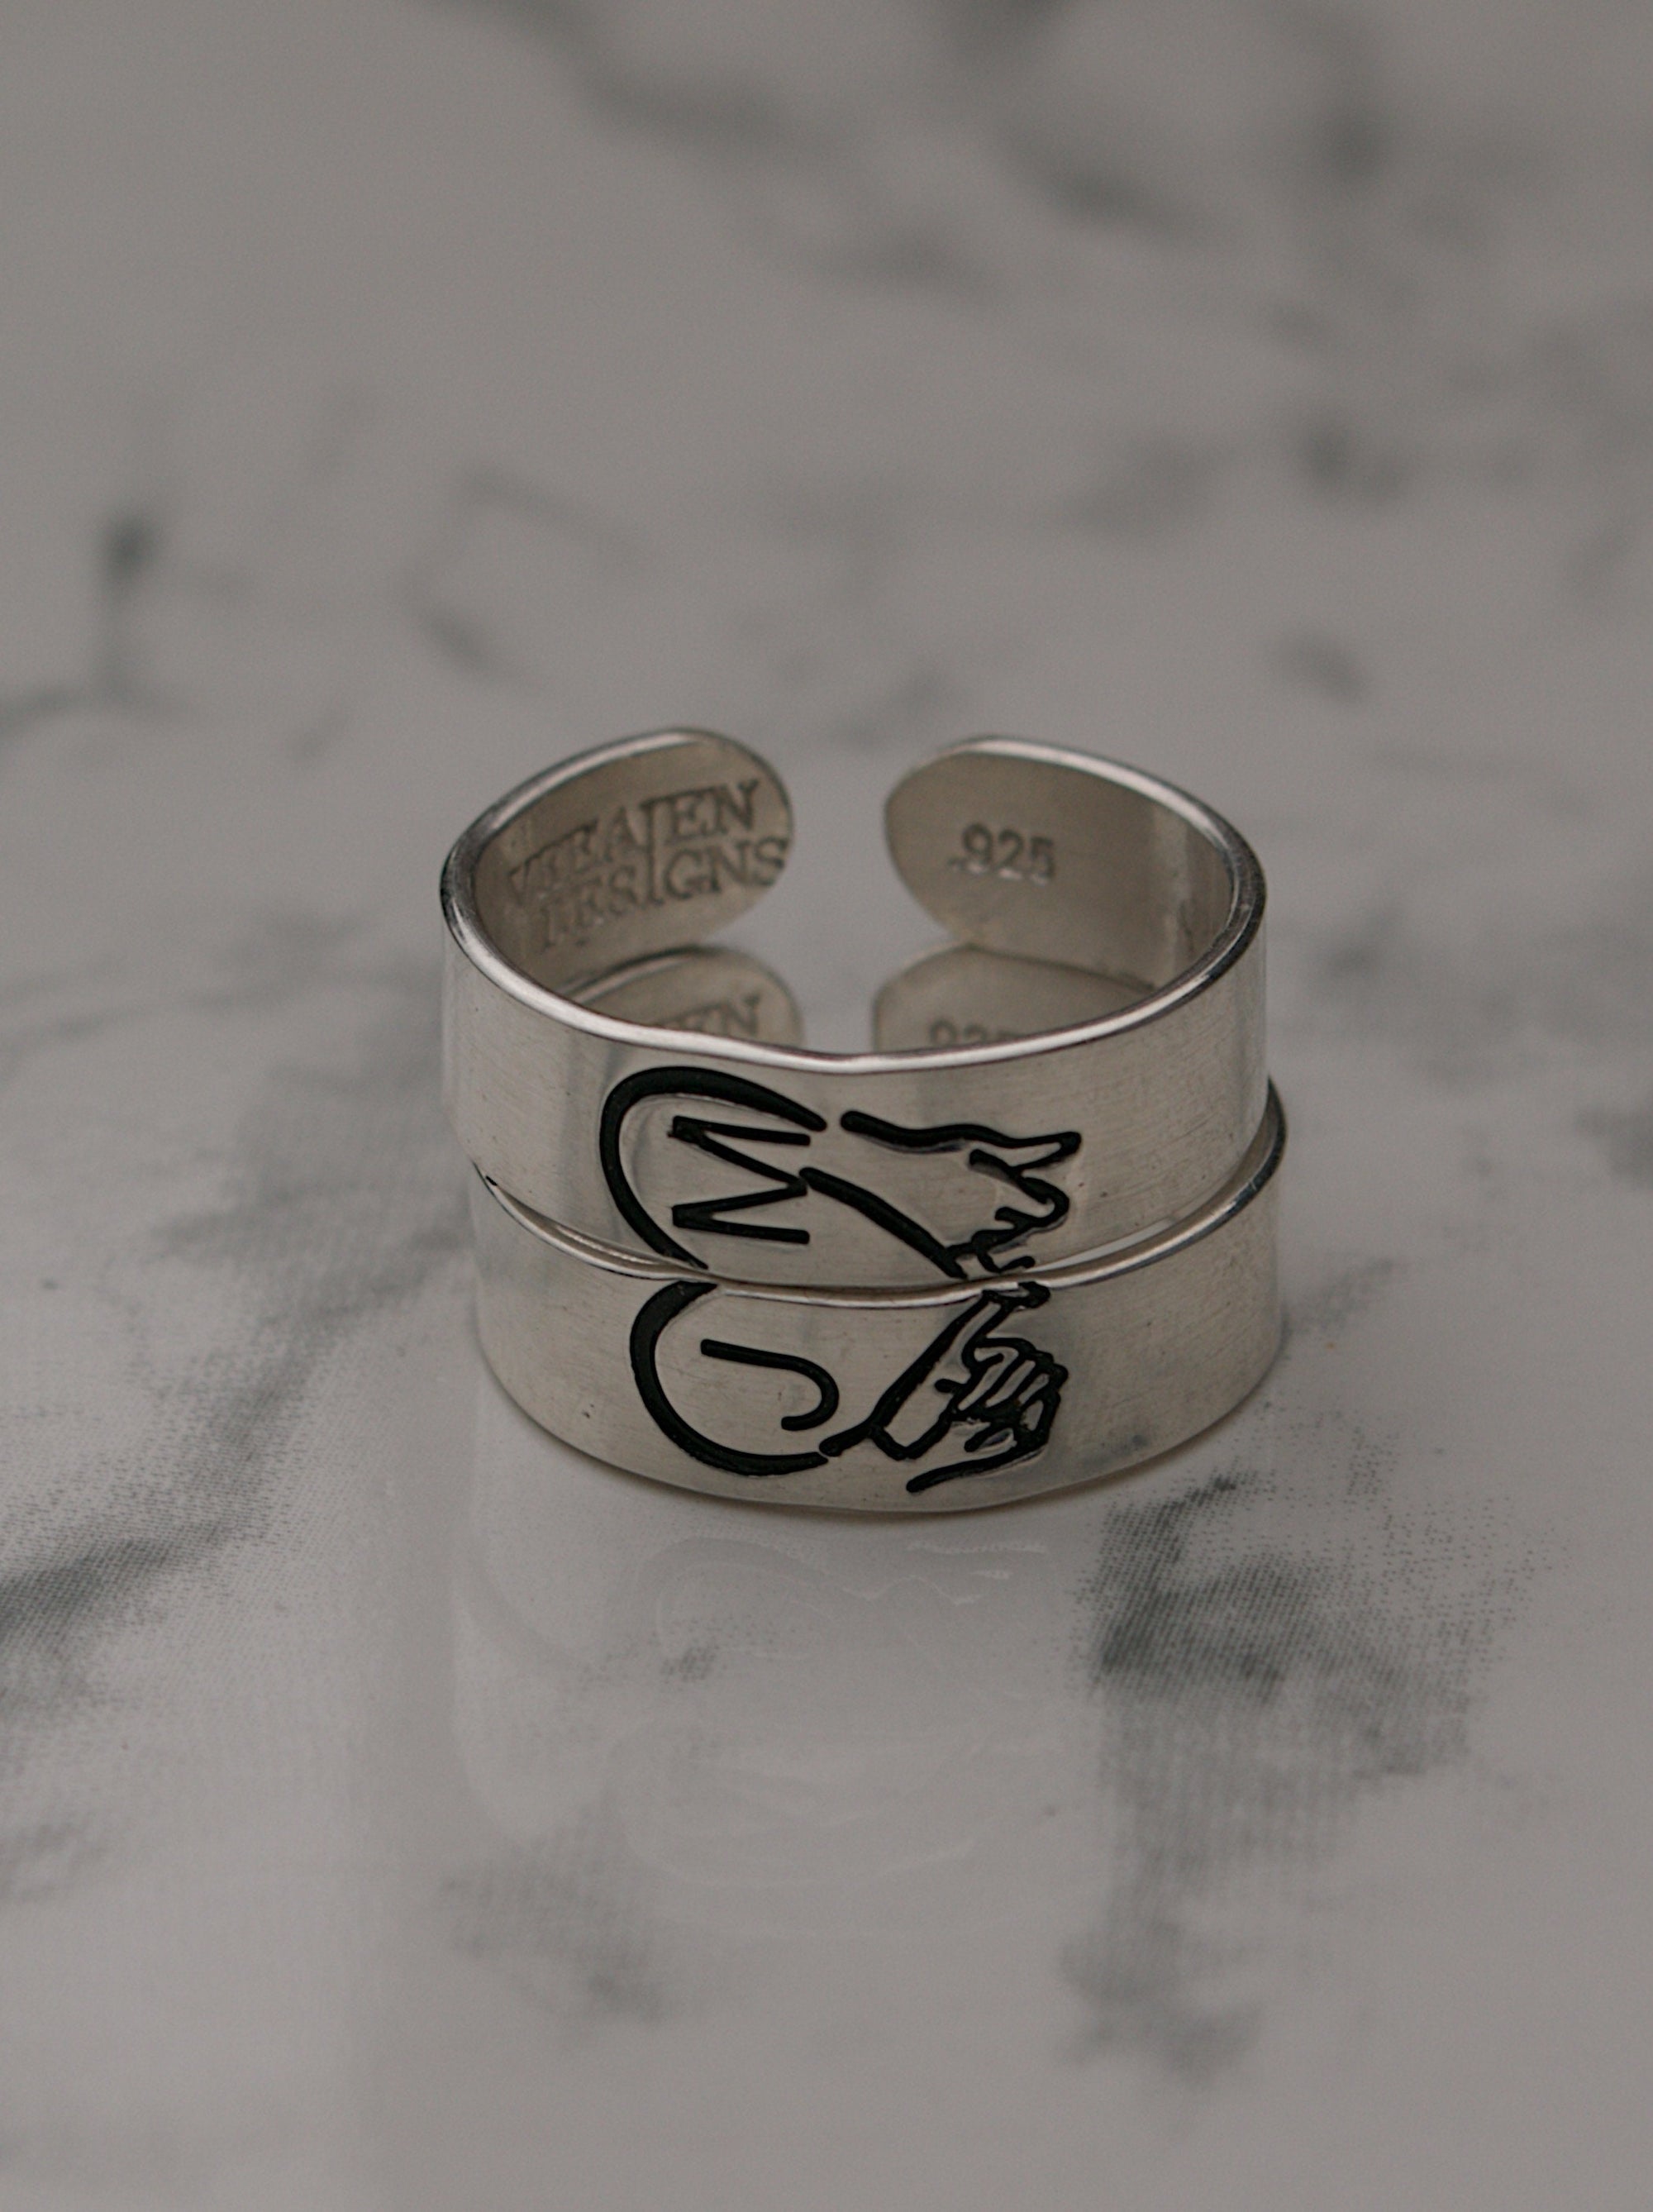 Pinky Promise Couple Ring | Friendship Rings | Matching Ring Set | Custom Pinky Swear Initial Ring Set | Best Friend Gift | Couples Rings